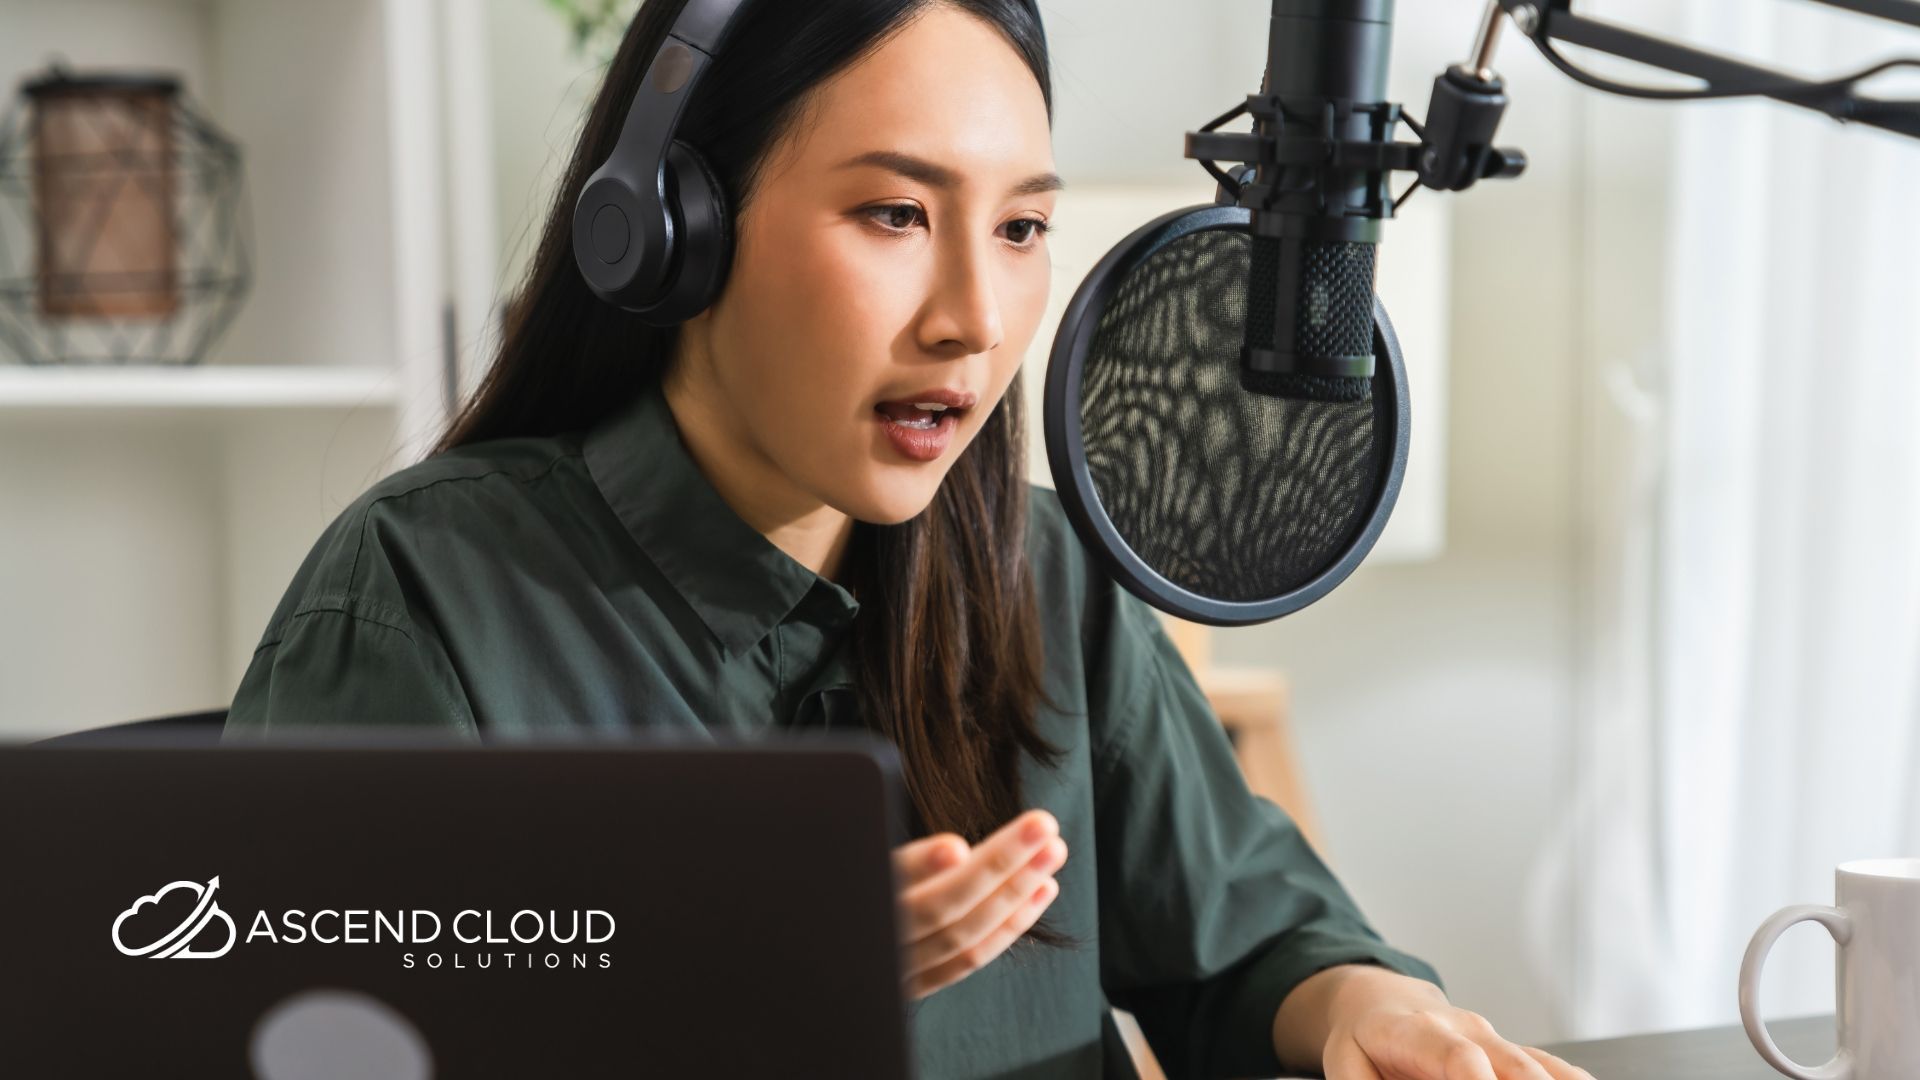 Want to keep on top of the latest trends in cloud computing? There's a plethora of podcasts and YouTube channels to choose from. Discover 5 of the best.
